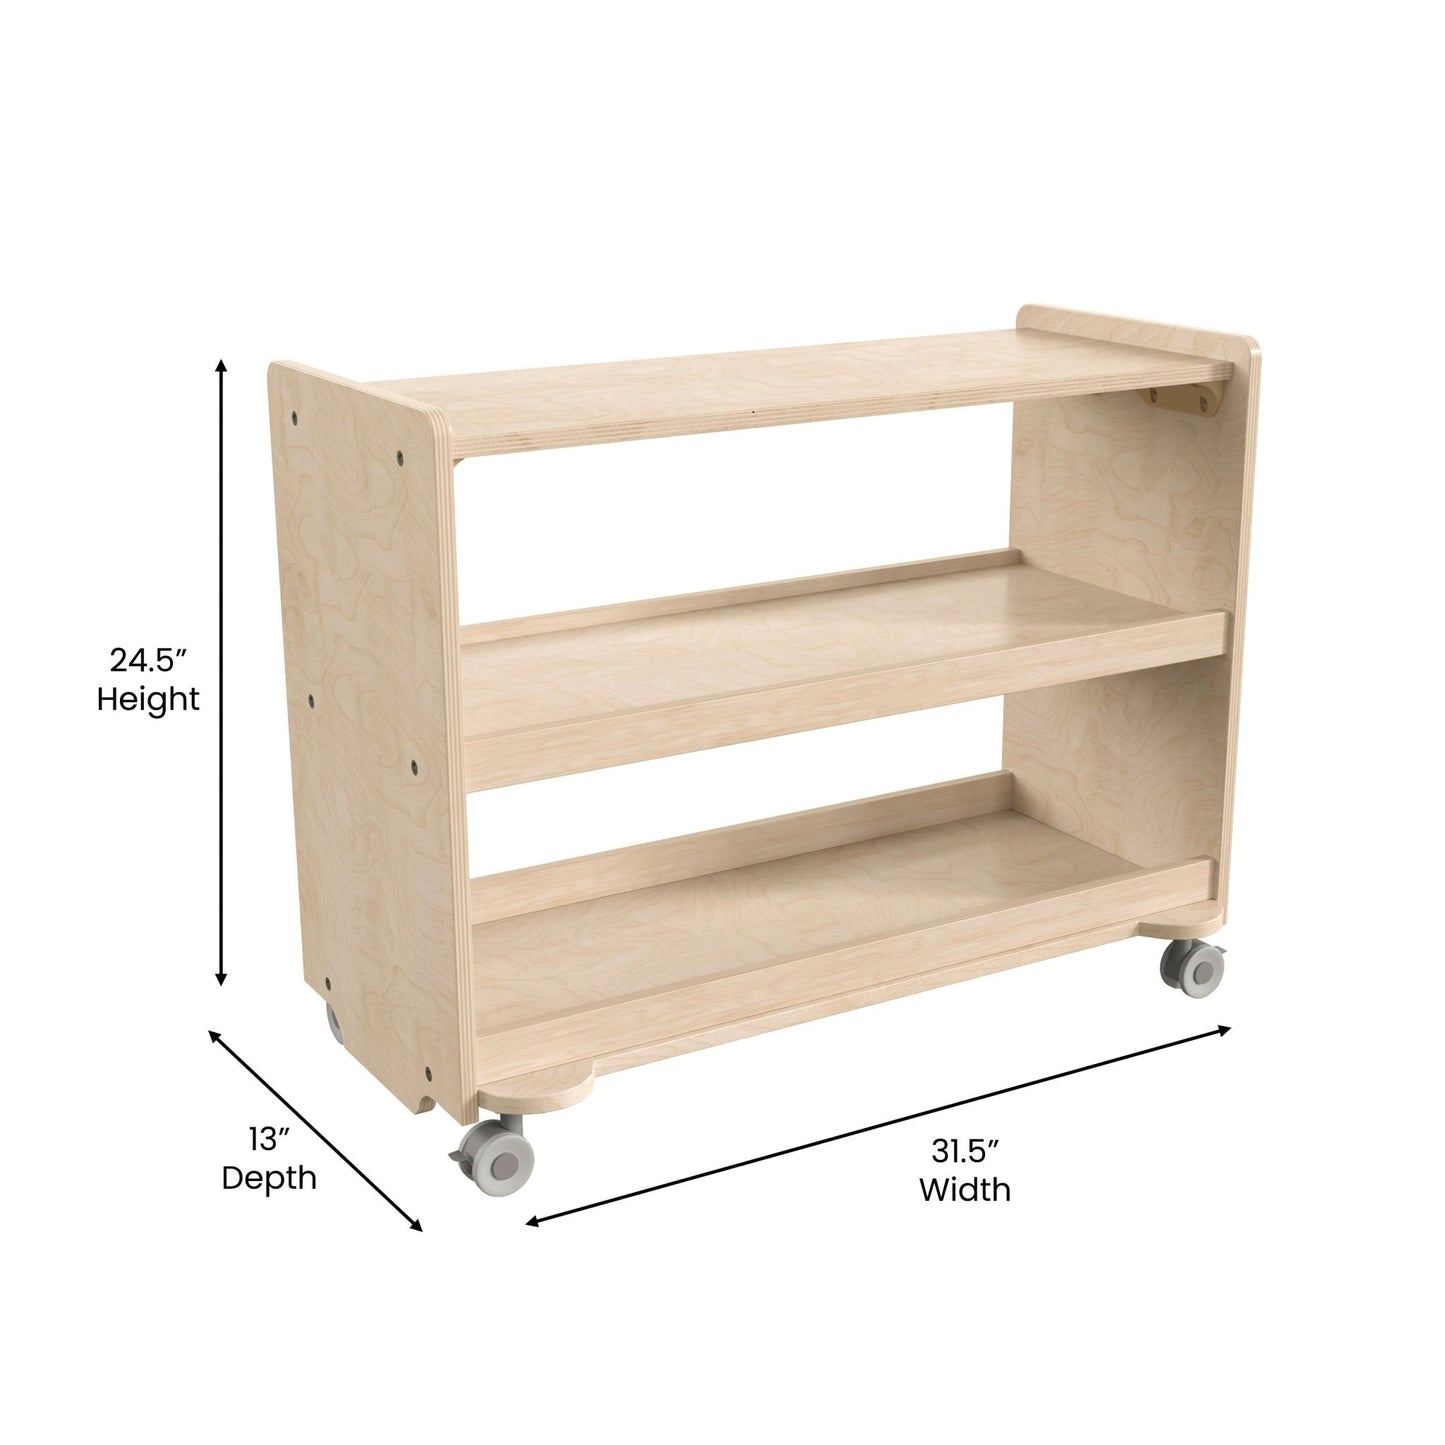 Bright Beginnings Commercial Grade Space Saving 3 Shelf Wooden Mobile Classroom Storage Cart with Locking Caster Wheels, Kid Friendly Design, Natural - SchoolOutlet